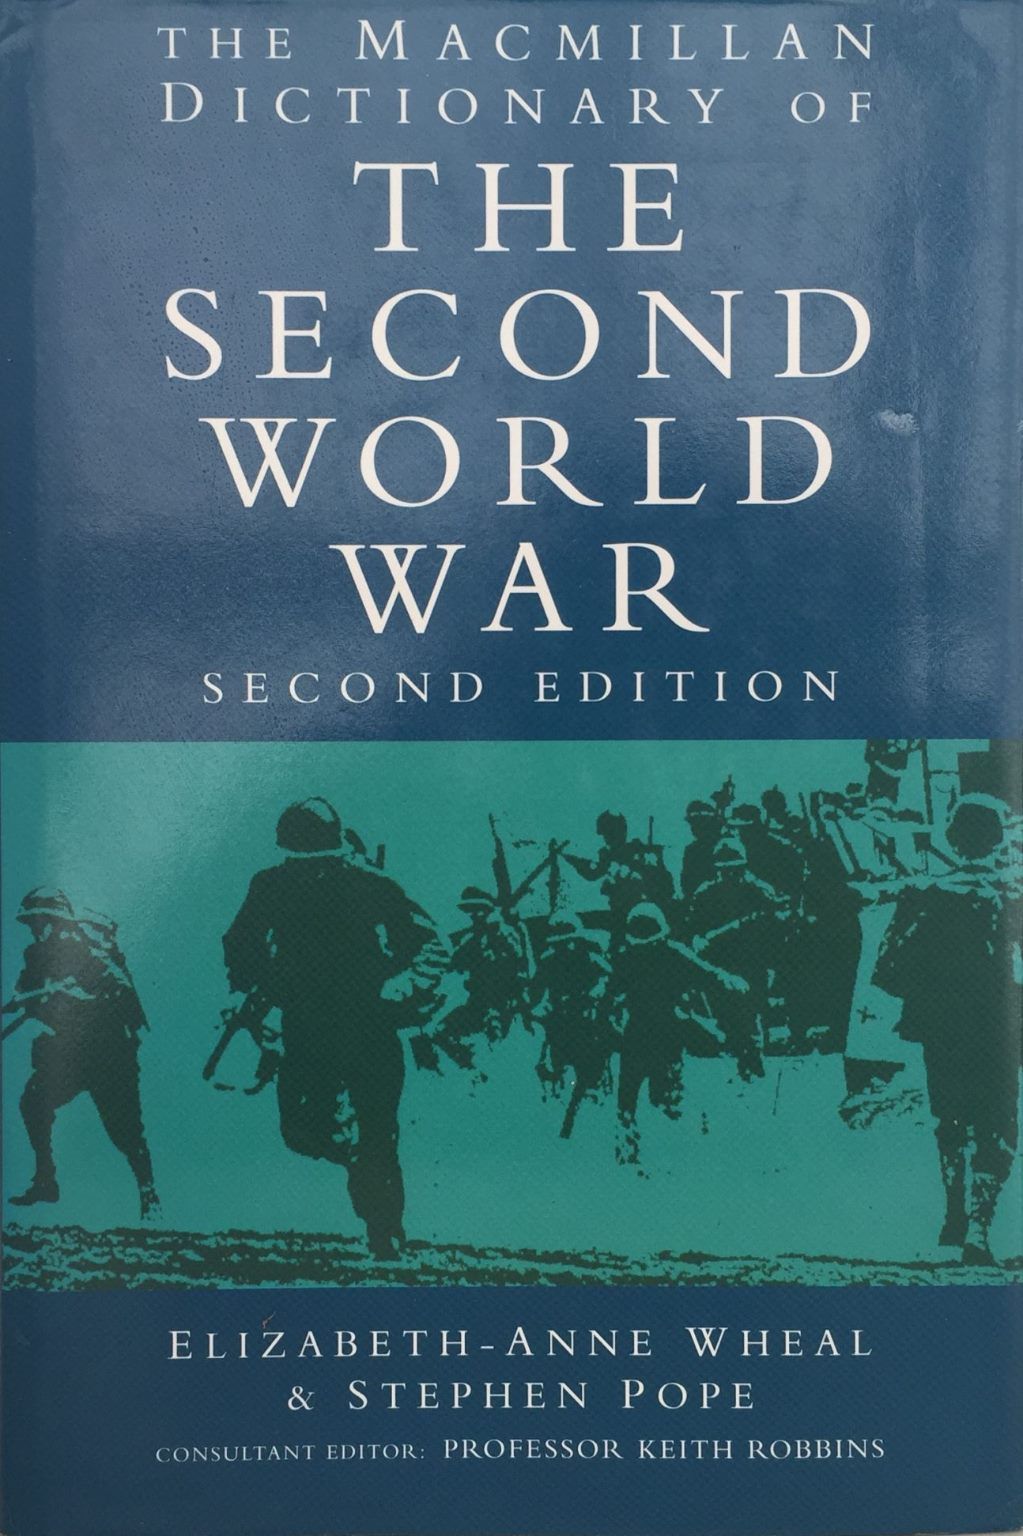 The Macmillan Dictionary of the Second World War